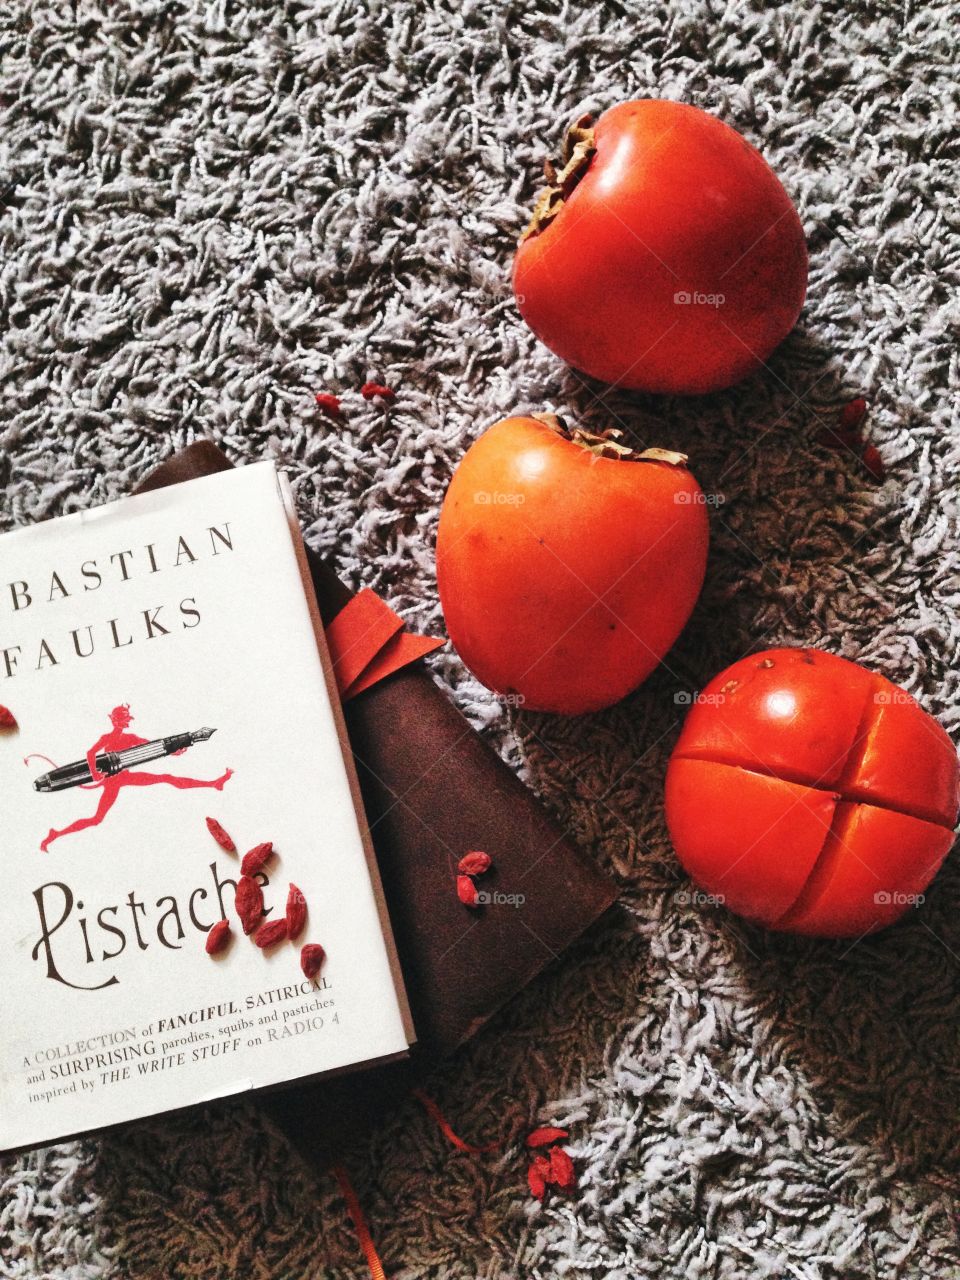 Breakfast . Persimmons and berries with books 